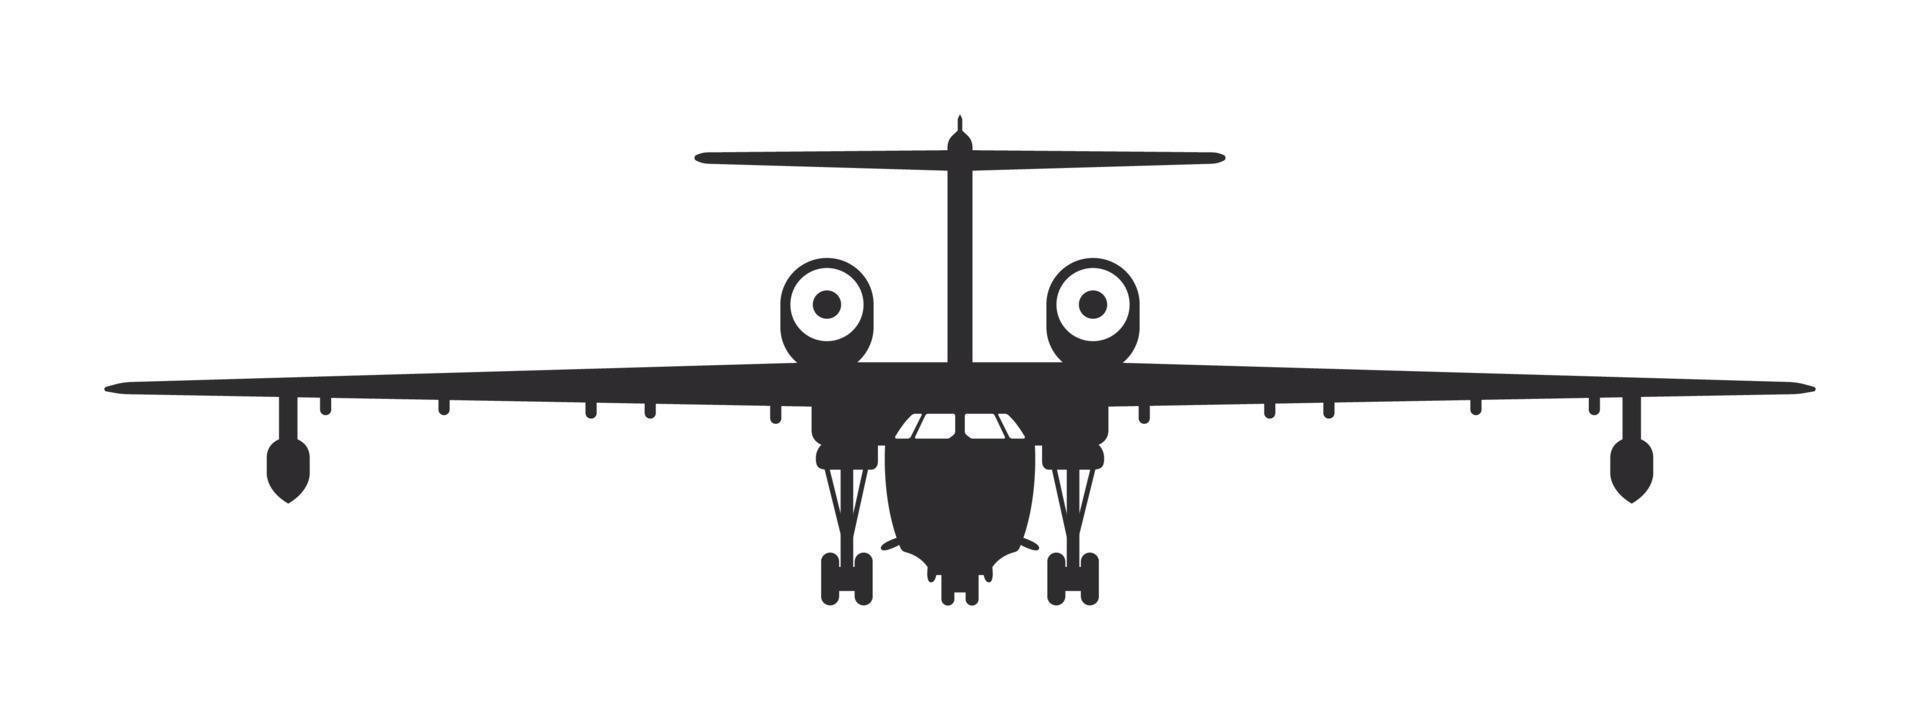 Plane. Special Purpose Aircraft. Airplane silhouette front view. Flight transport symbol. Vector image